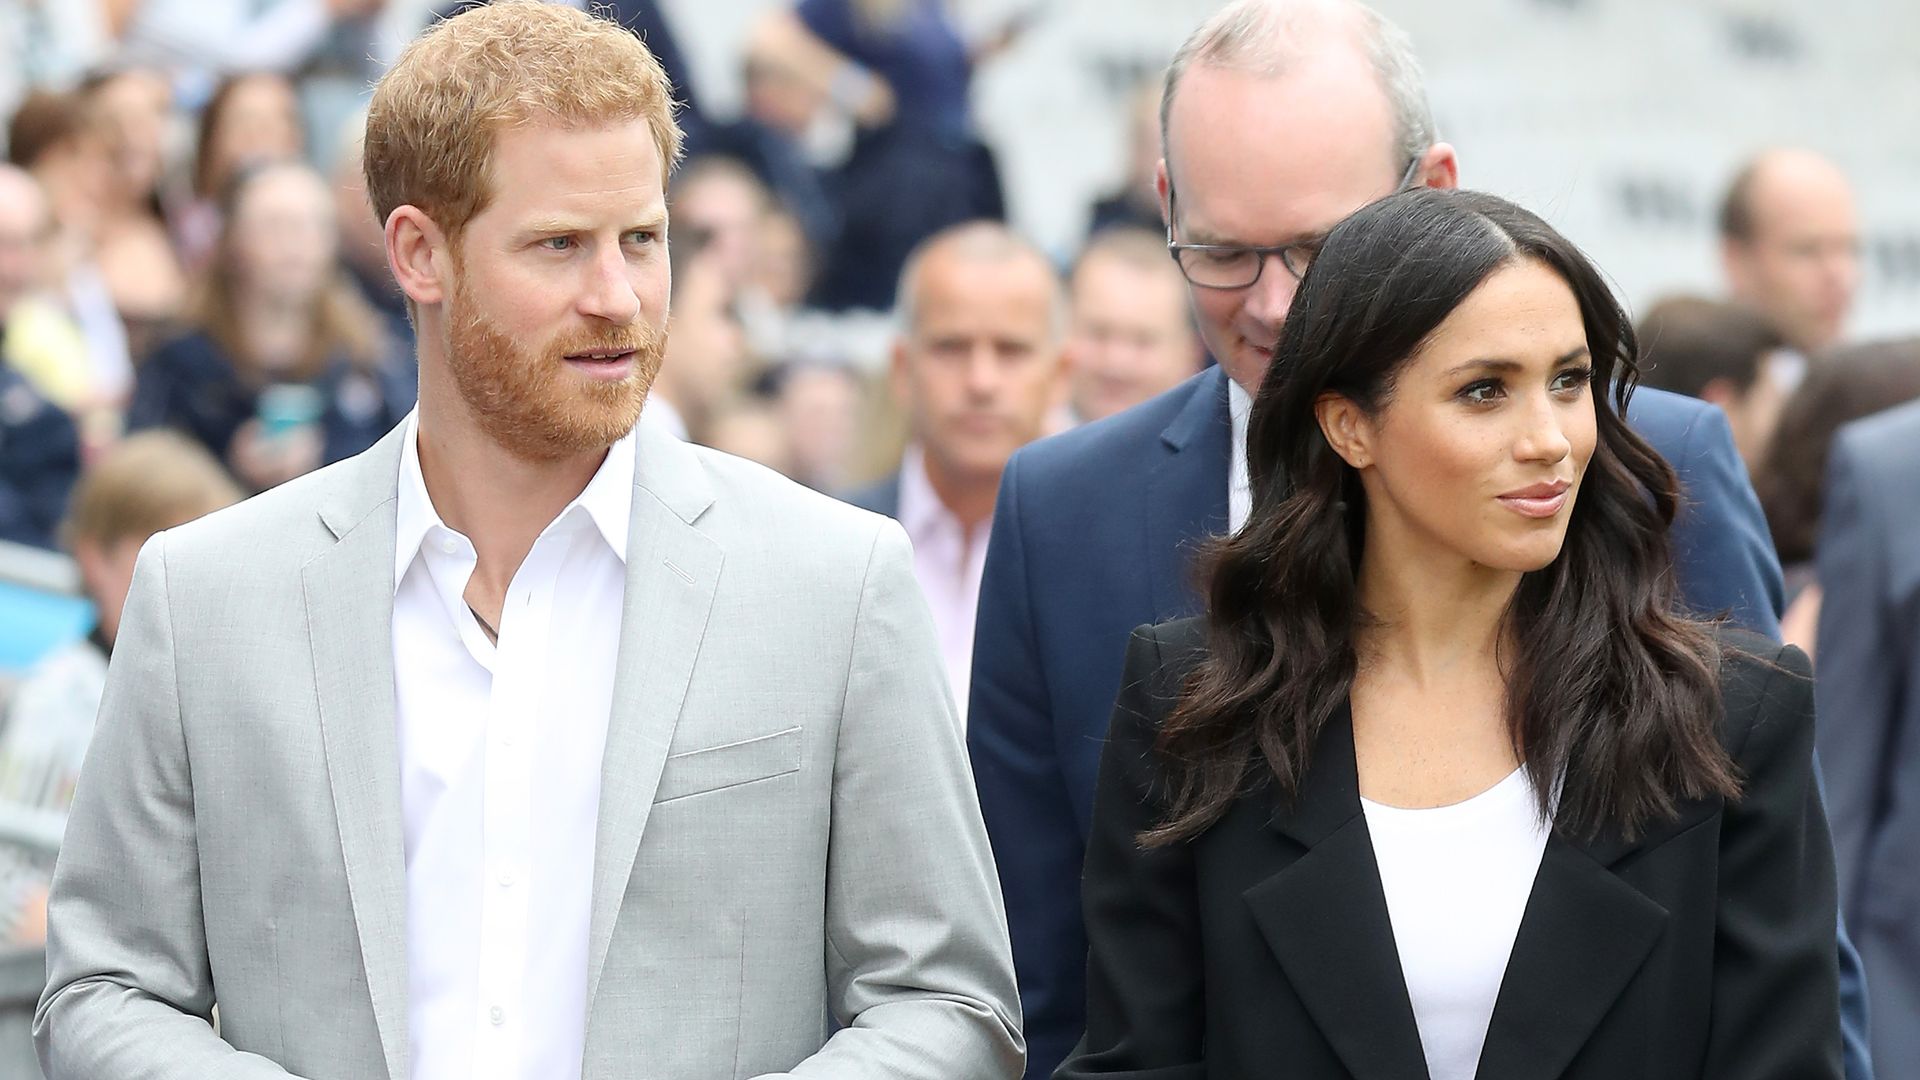 Prince Harry to make speedy exit following Invictus service to reunite with Meghan Markle in Nigeria